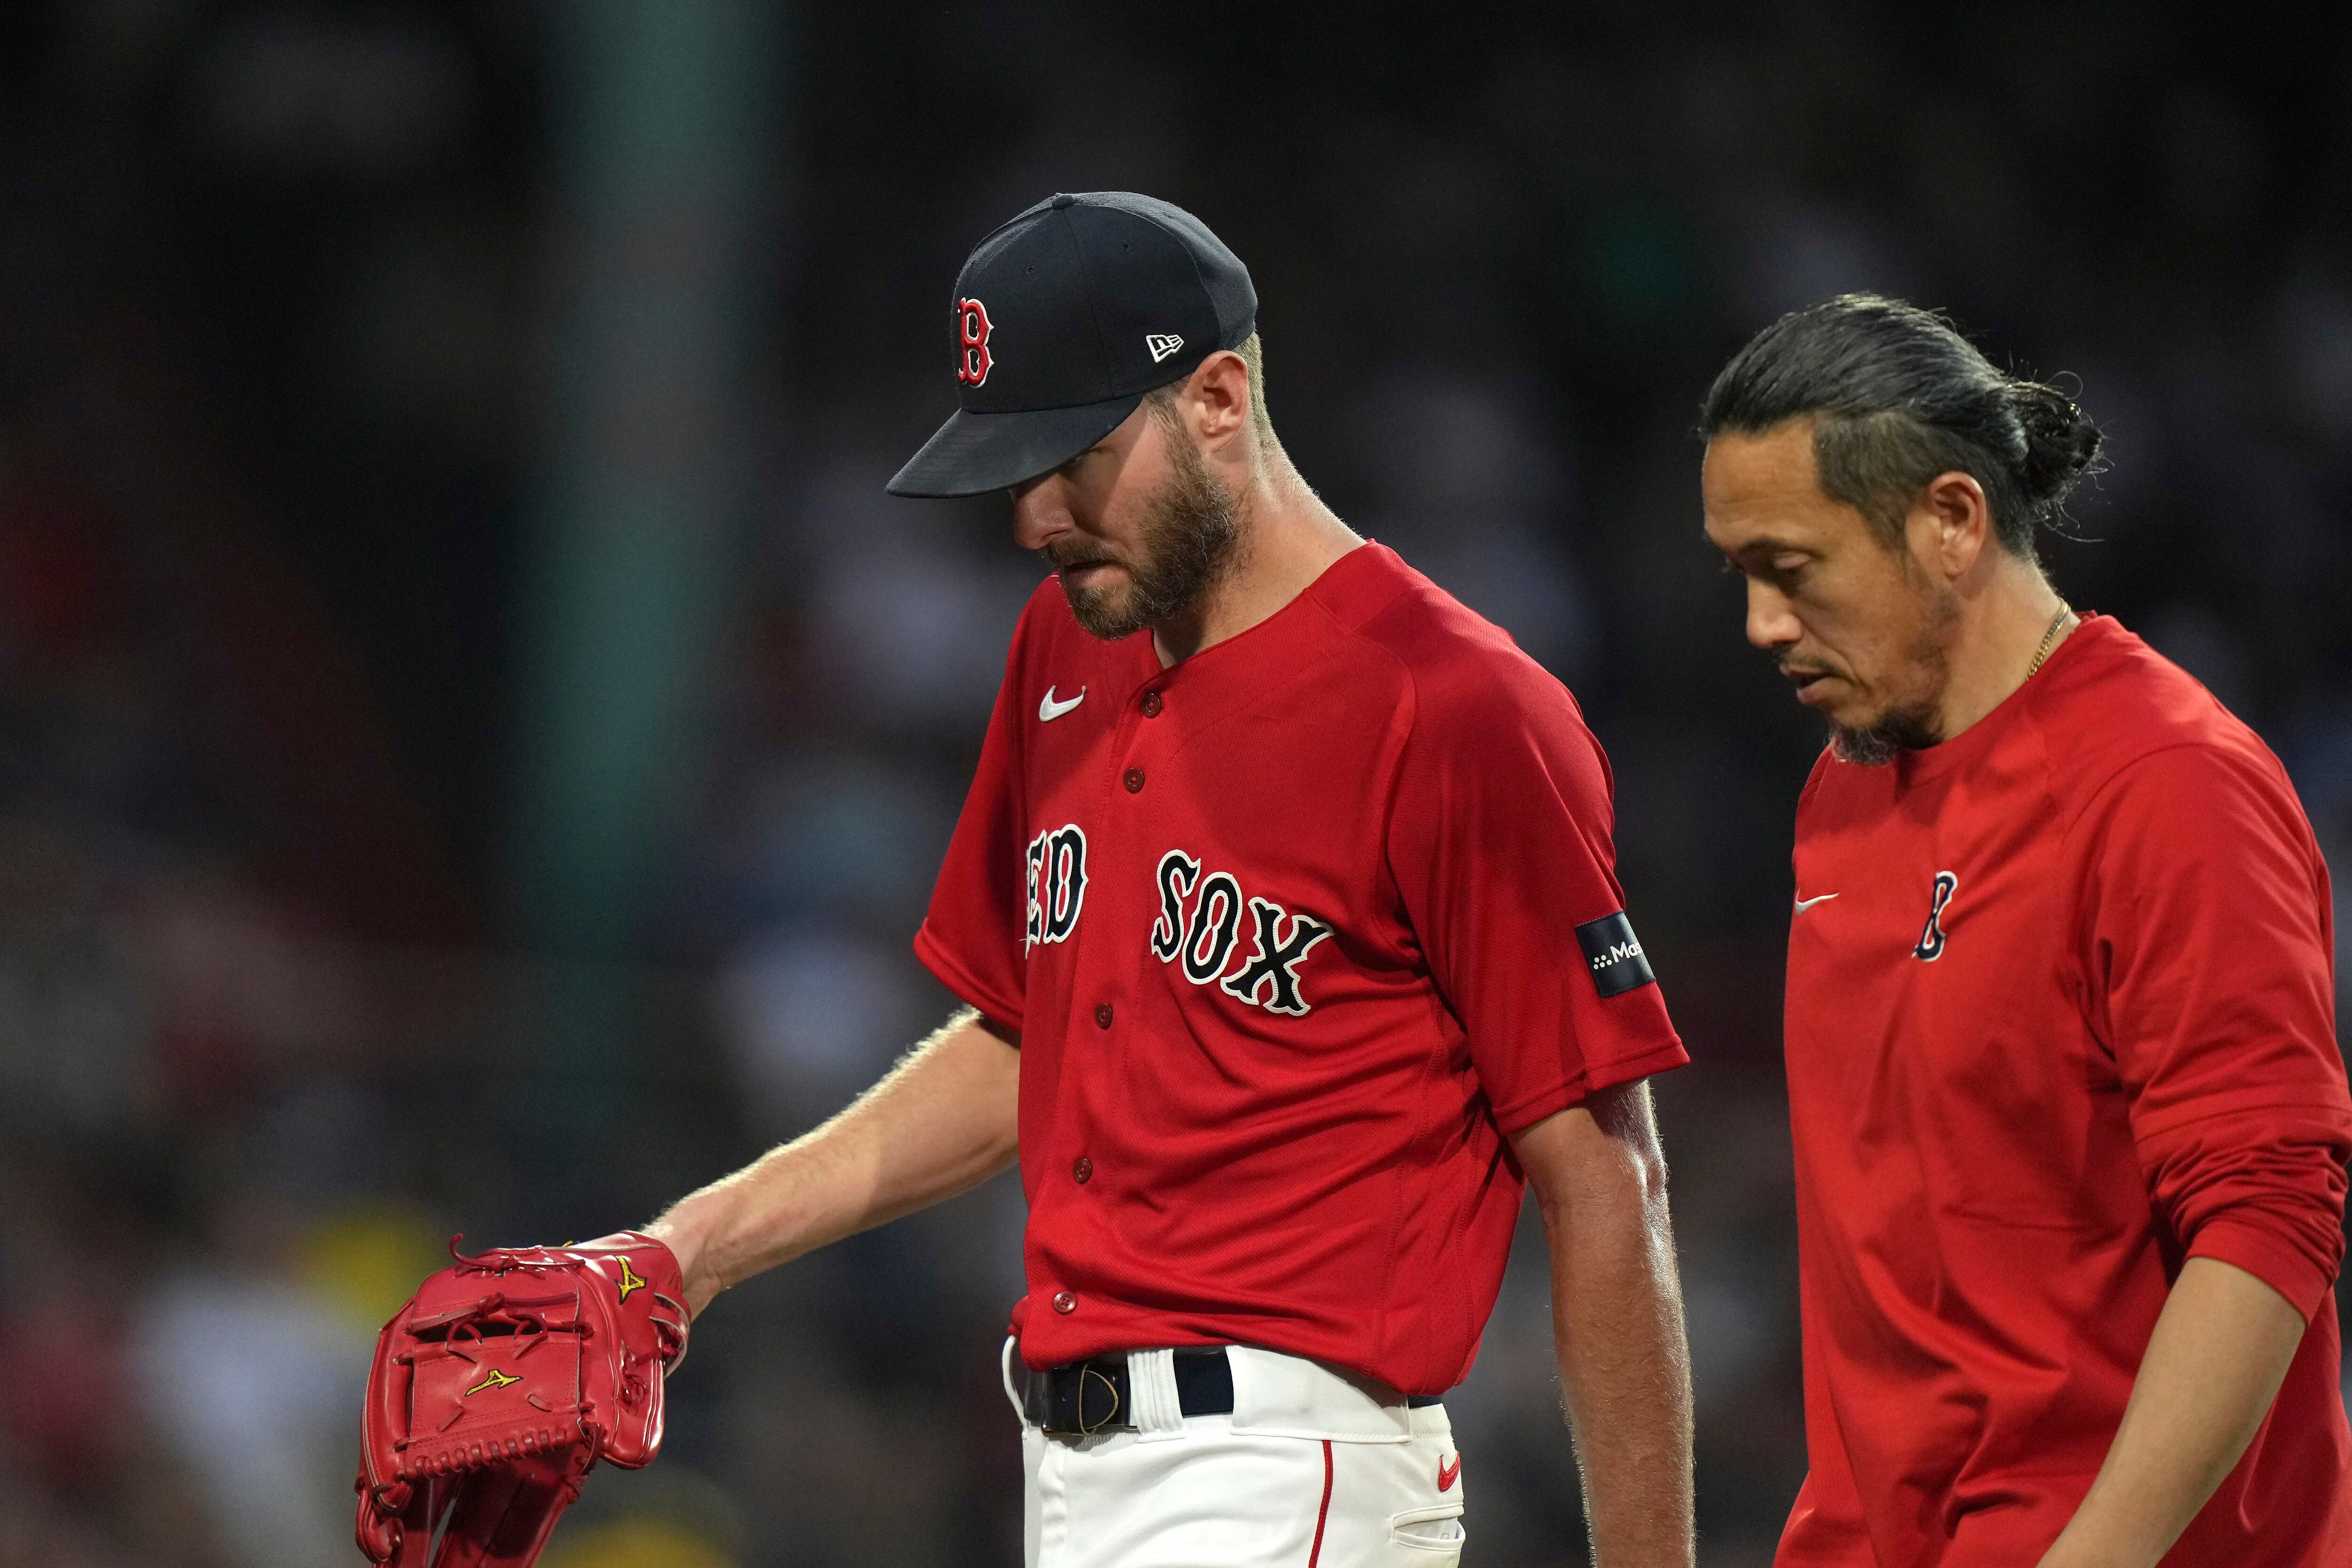 Red Sox beat Reds 8-2; Sale leaves in 4th due to injury